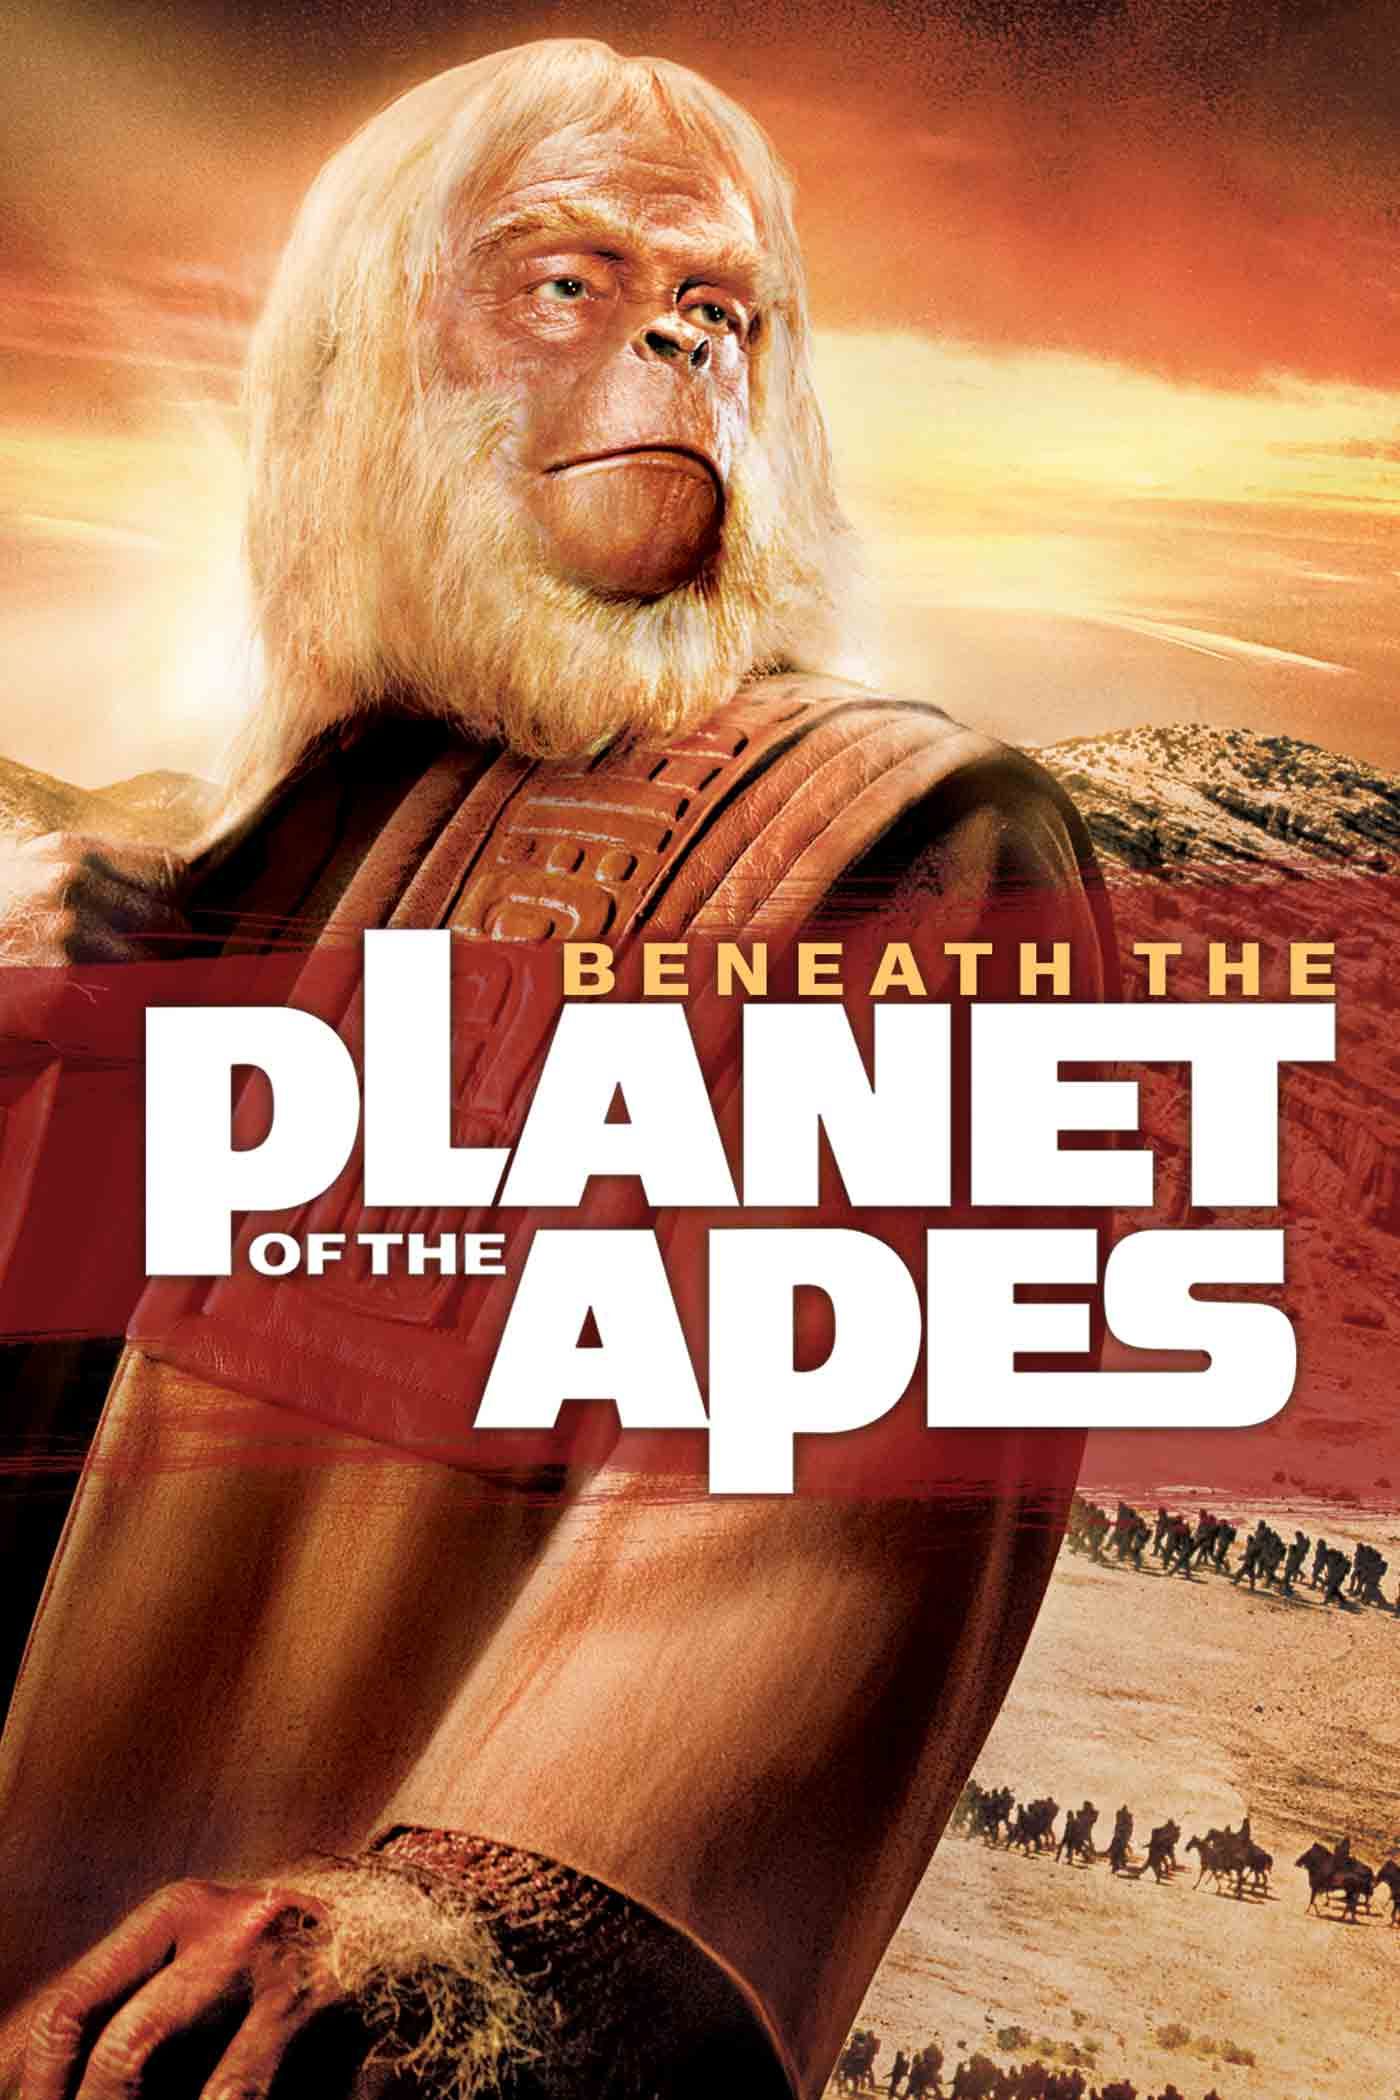 planet of the apes full movie download